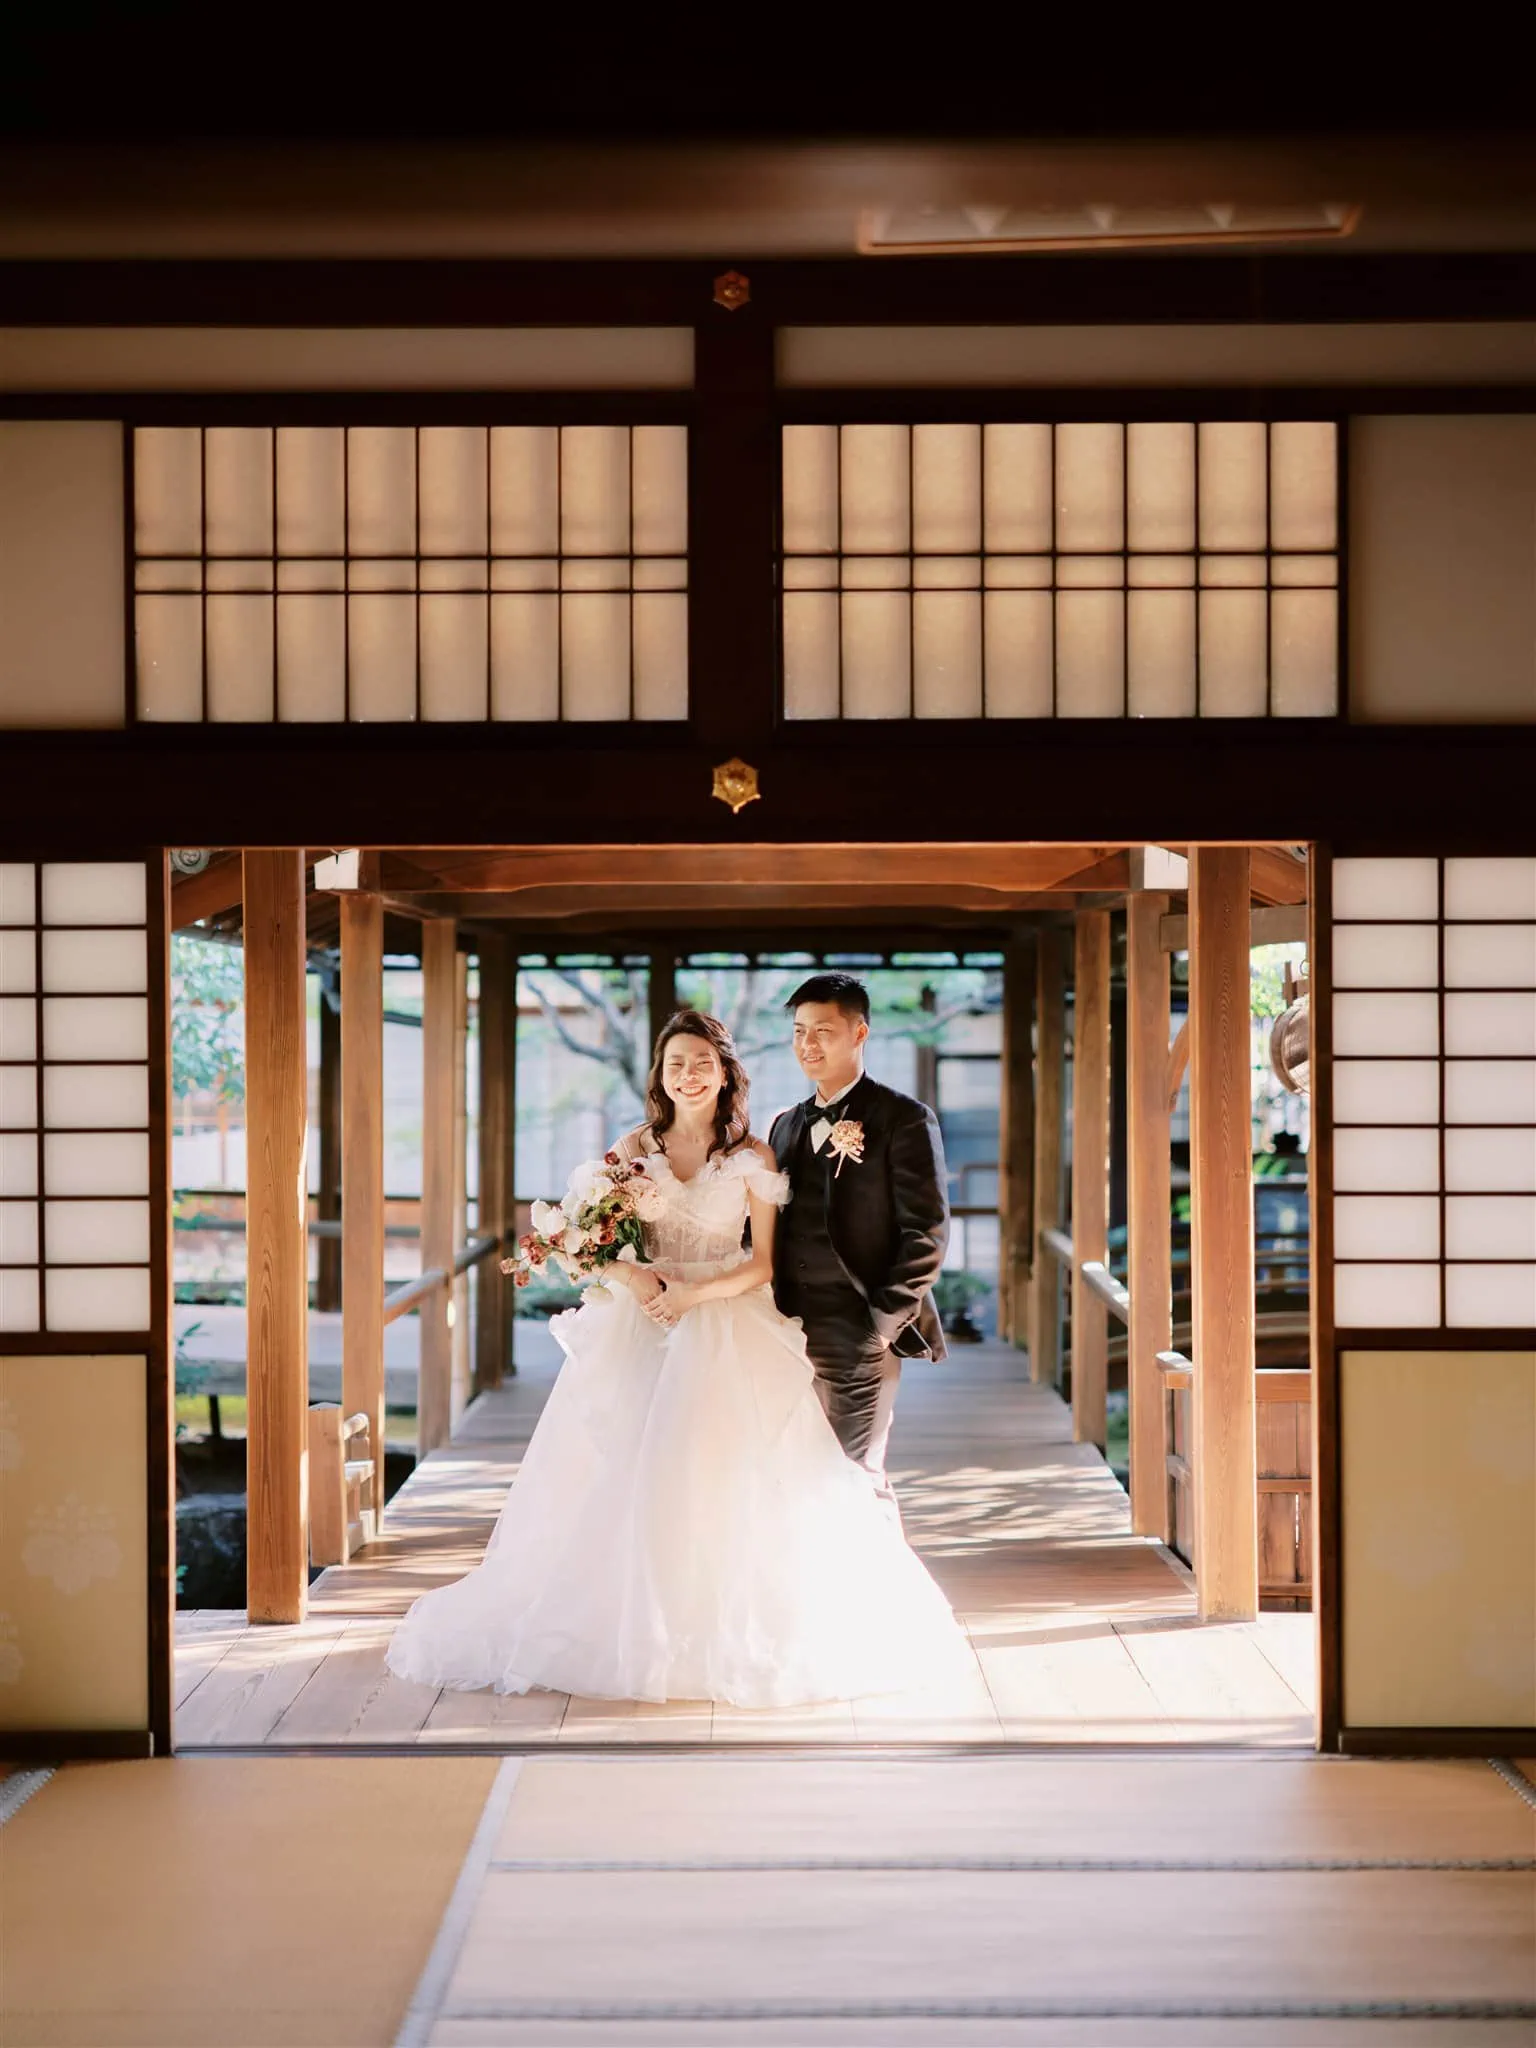 Kyoto Tokyo Japan Elopement Wedding Photographer, Planner & Videographer | A Japanese house serves as the picturesque backdrop for a bride and groom captured by a talented elopement photographer in Japan.